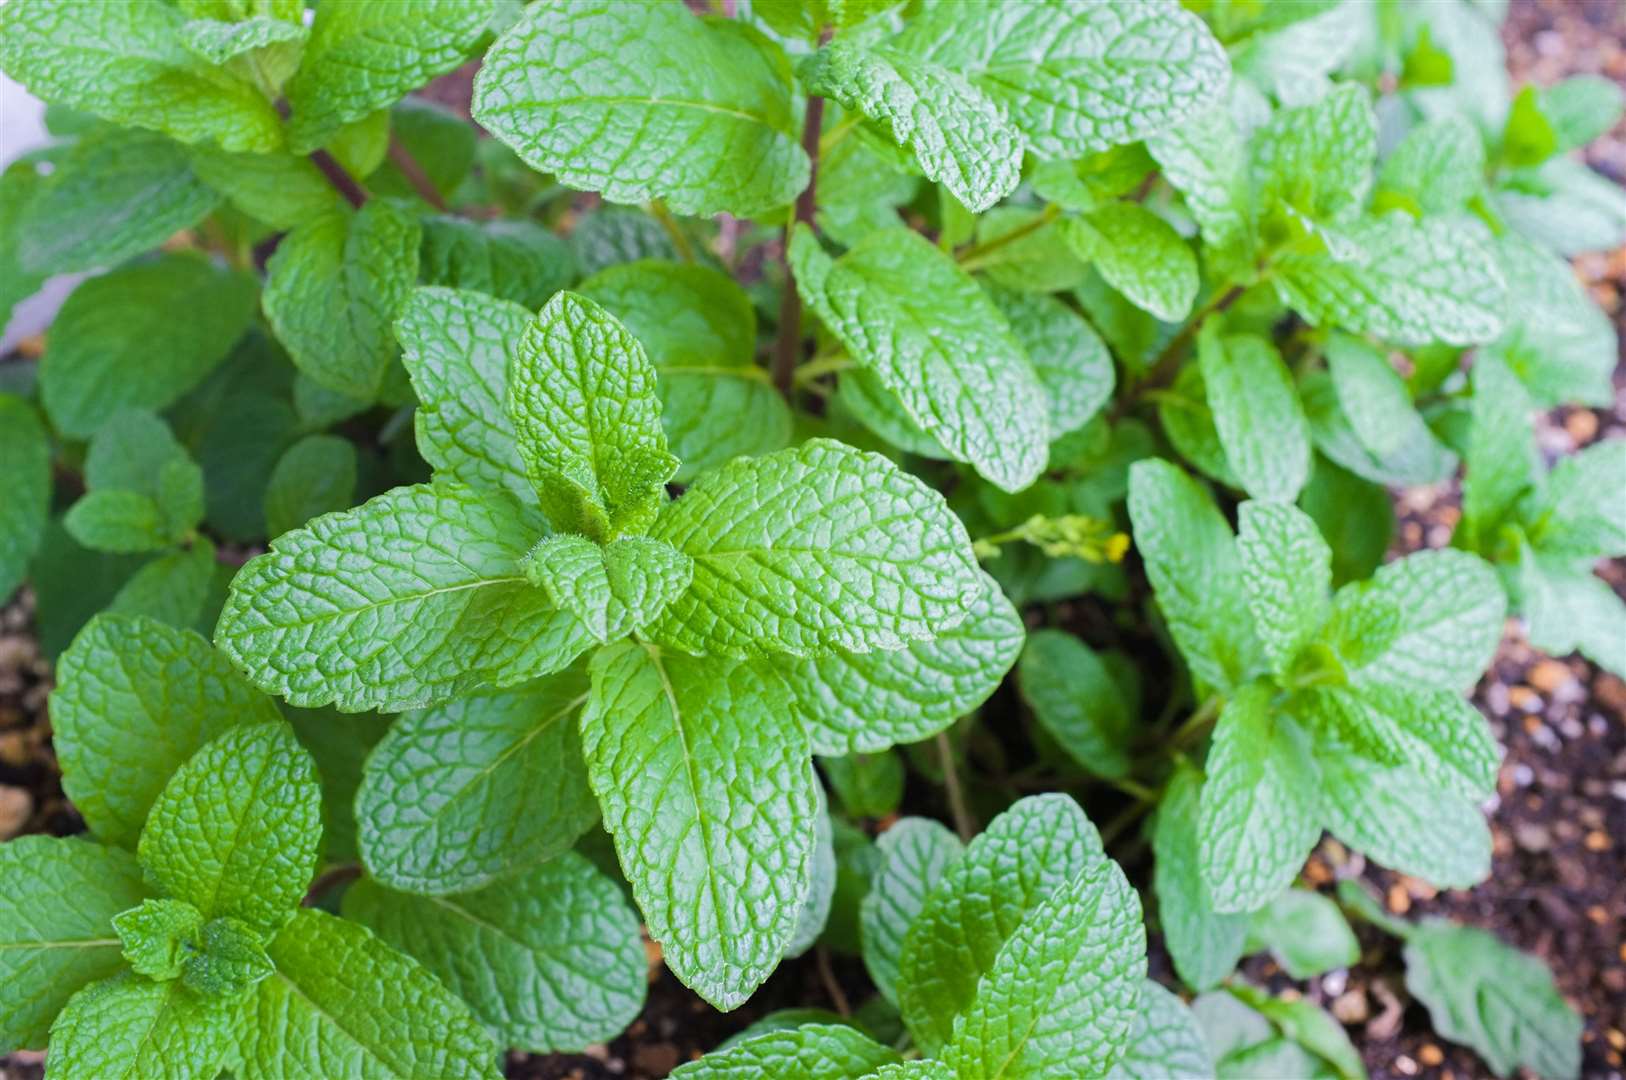 Either mint as a plant or the scent will discourage spiders from coming into your home